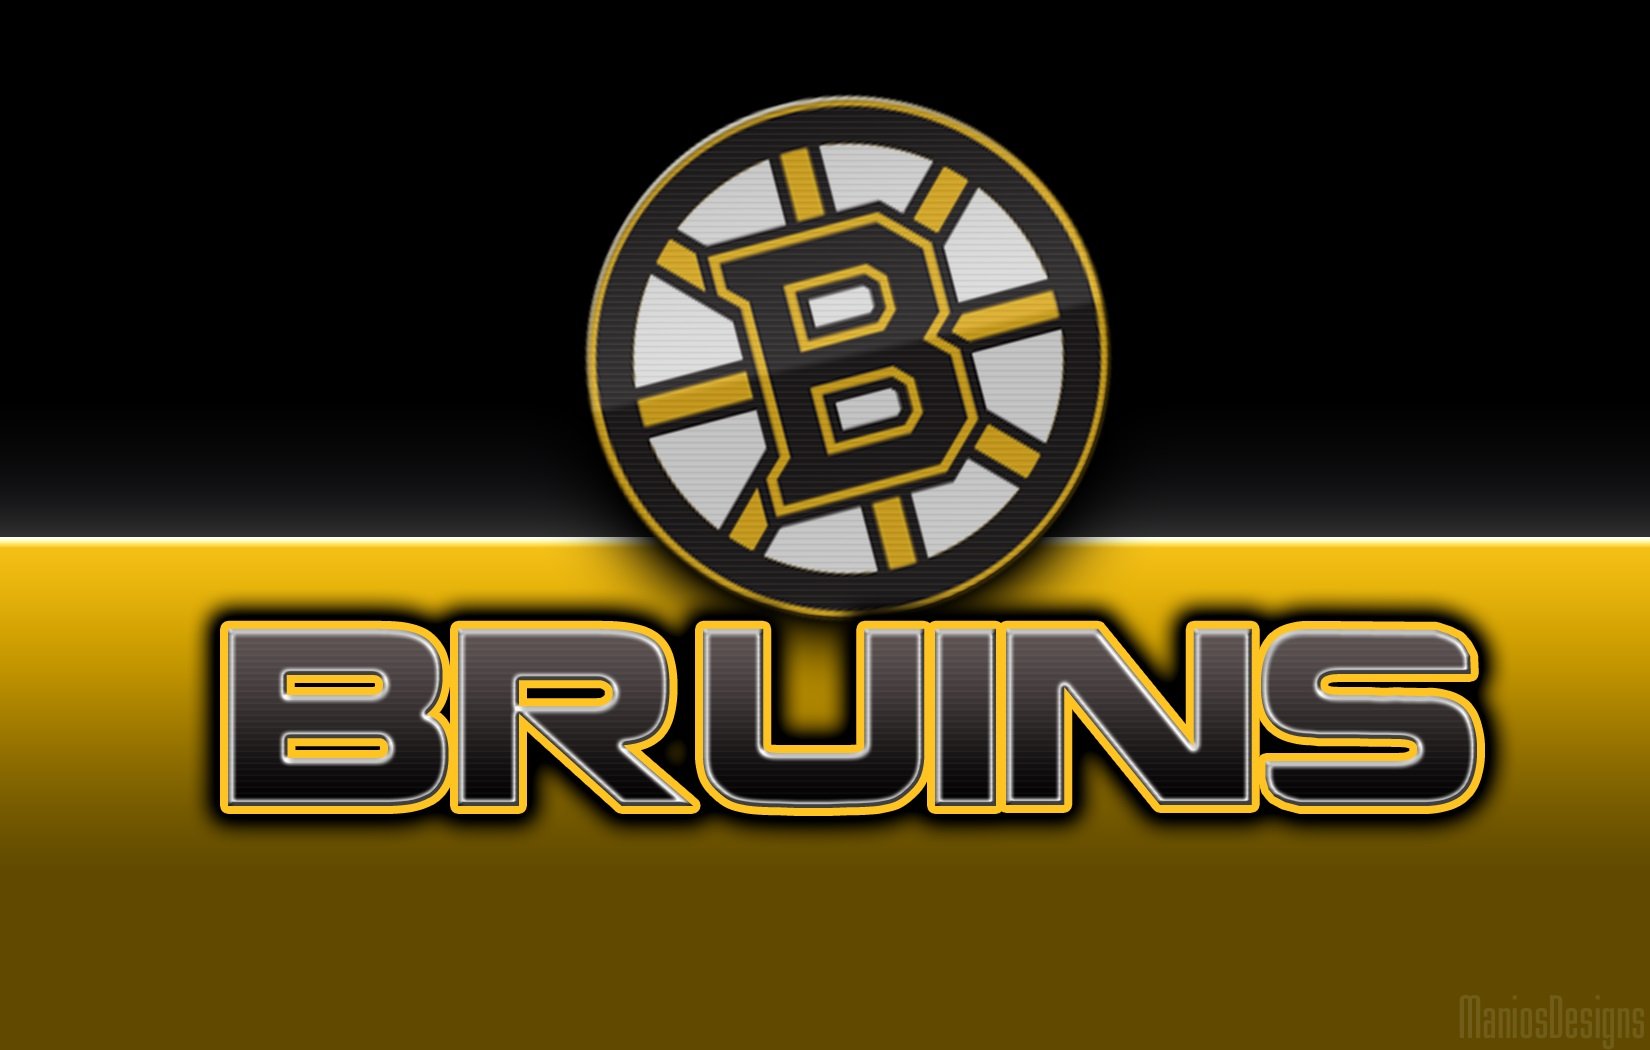 Share This Awesome Nhl Hockey Wallpaper On picture